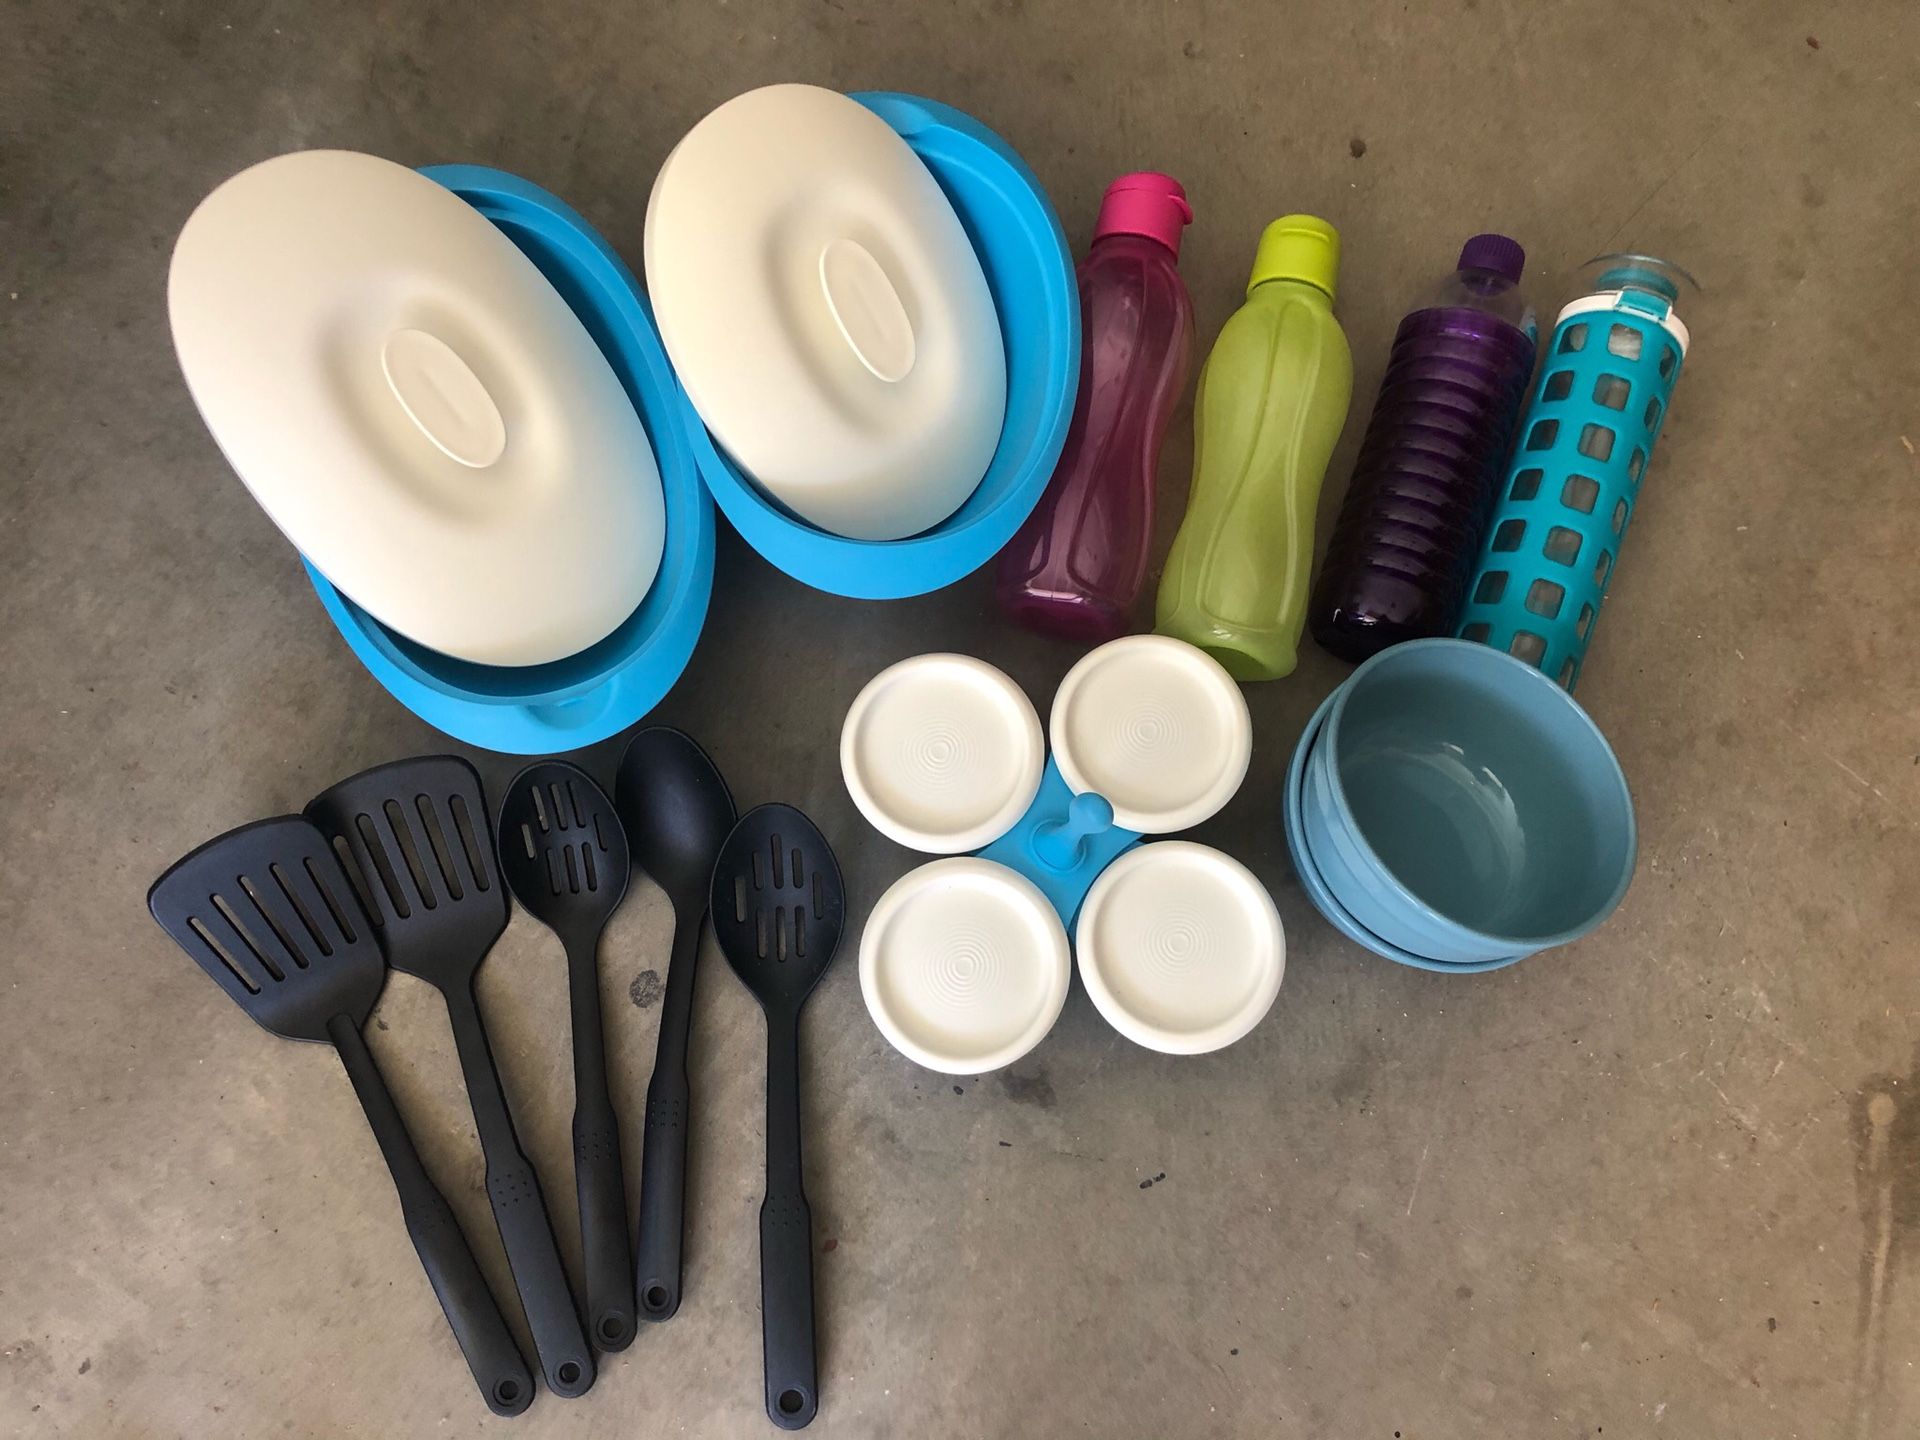 Brand new Tupperware and more